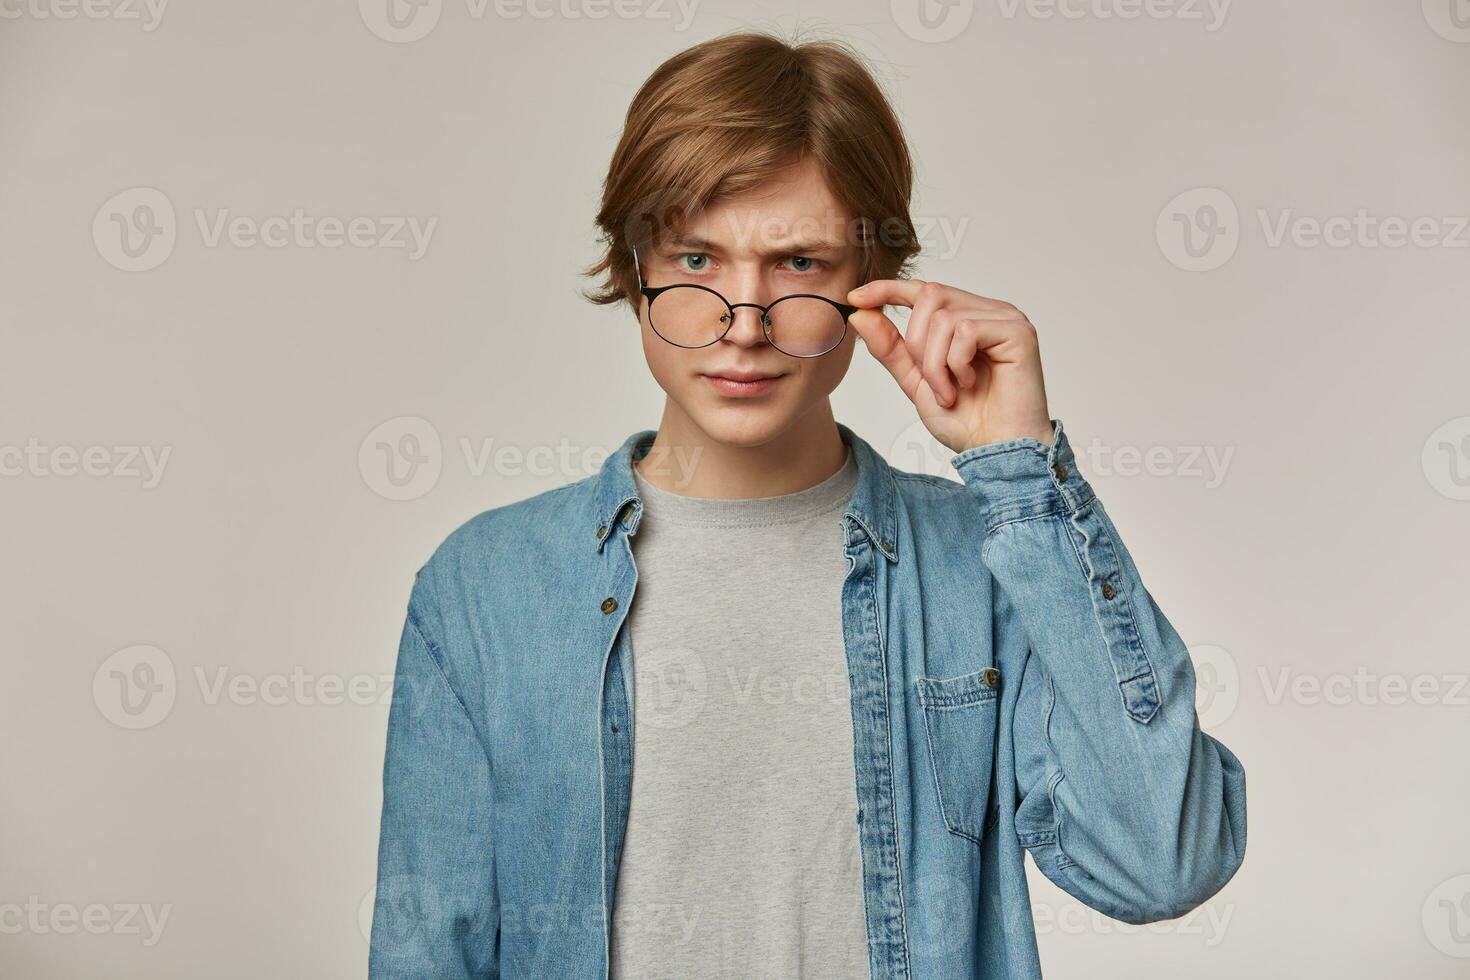 Portrait of serious, frowning male with blond hair. Wearing denim shirt and eyewear. Touching his glasses. Emotion concept. Watching accusingly at the camera isolated over grey background photo